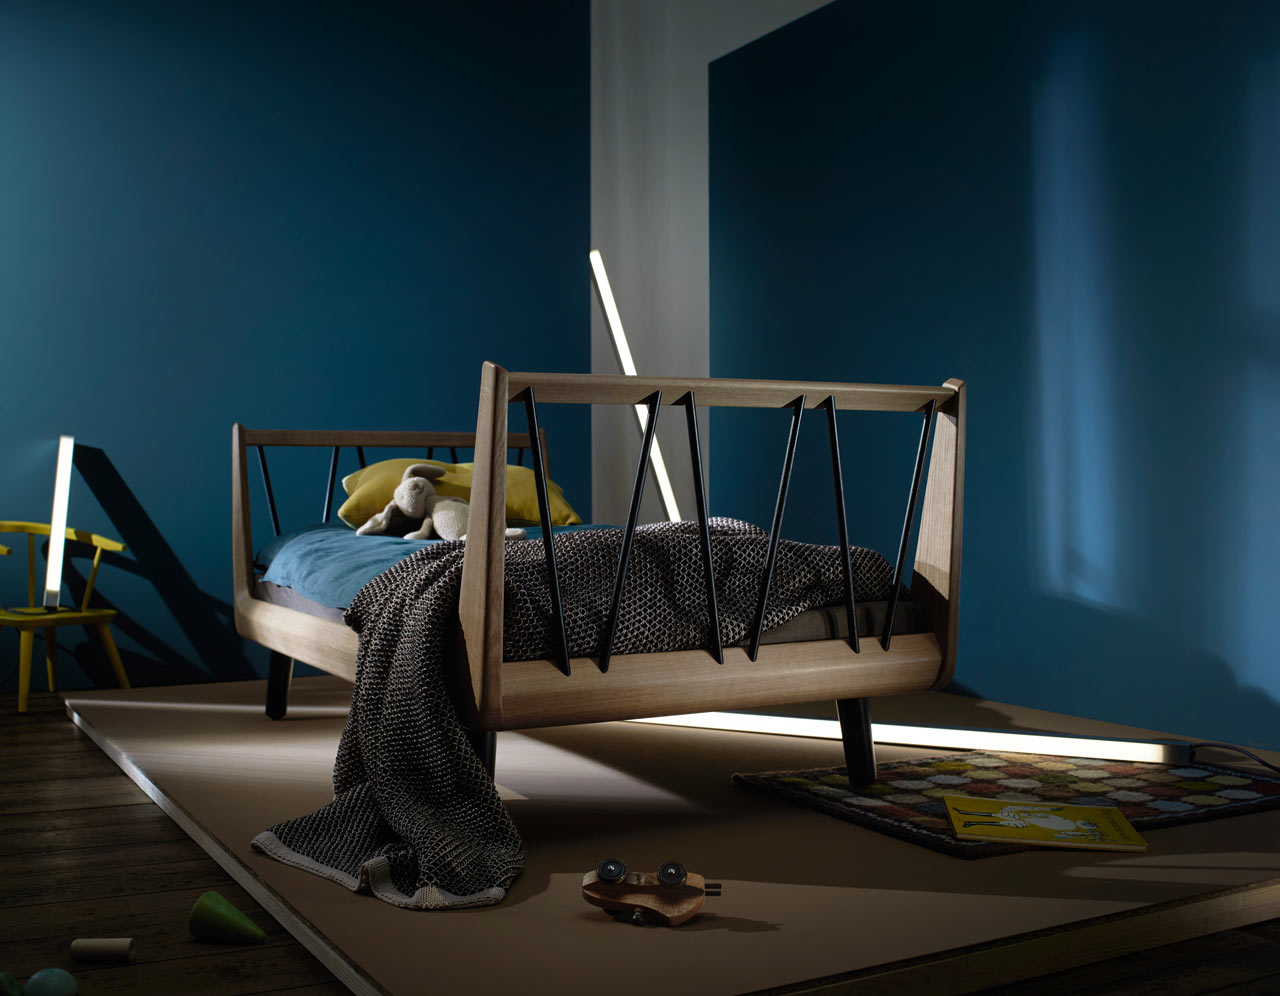 uuio Gives a New Spin on a Child's Bed